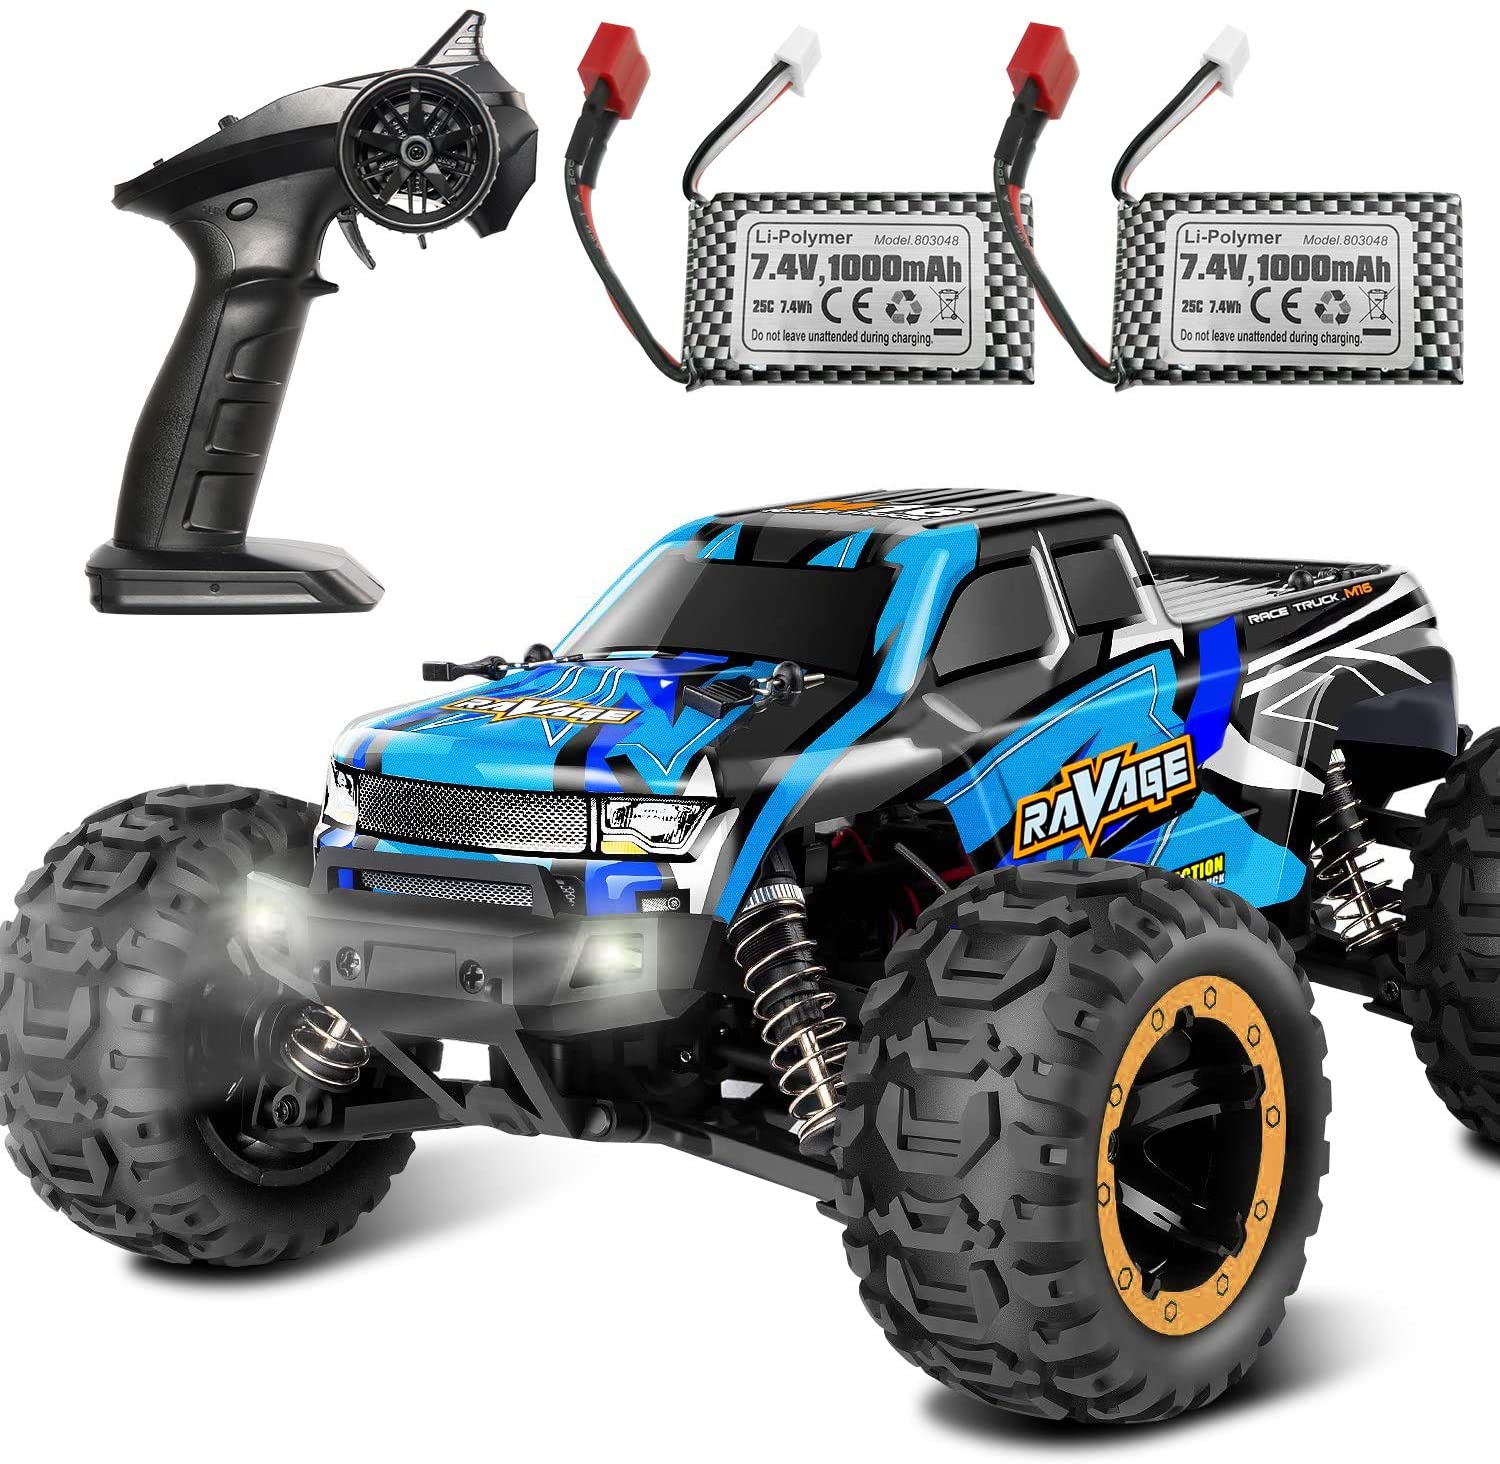 RC Cars, Fcoreey RC Truck 1:16 Remote Control Car for Boys, 40Km/h High Speed Racing Car, 2.4 GHz 4x4 Off Road Monster Truck, Electric Vehicle with LEDs, Hobby Car Toy Gift for Adult Kid Girl